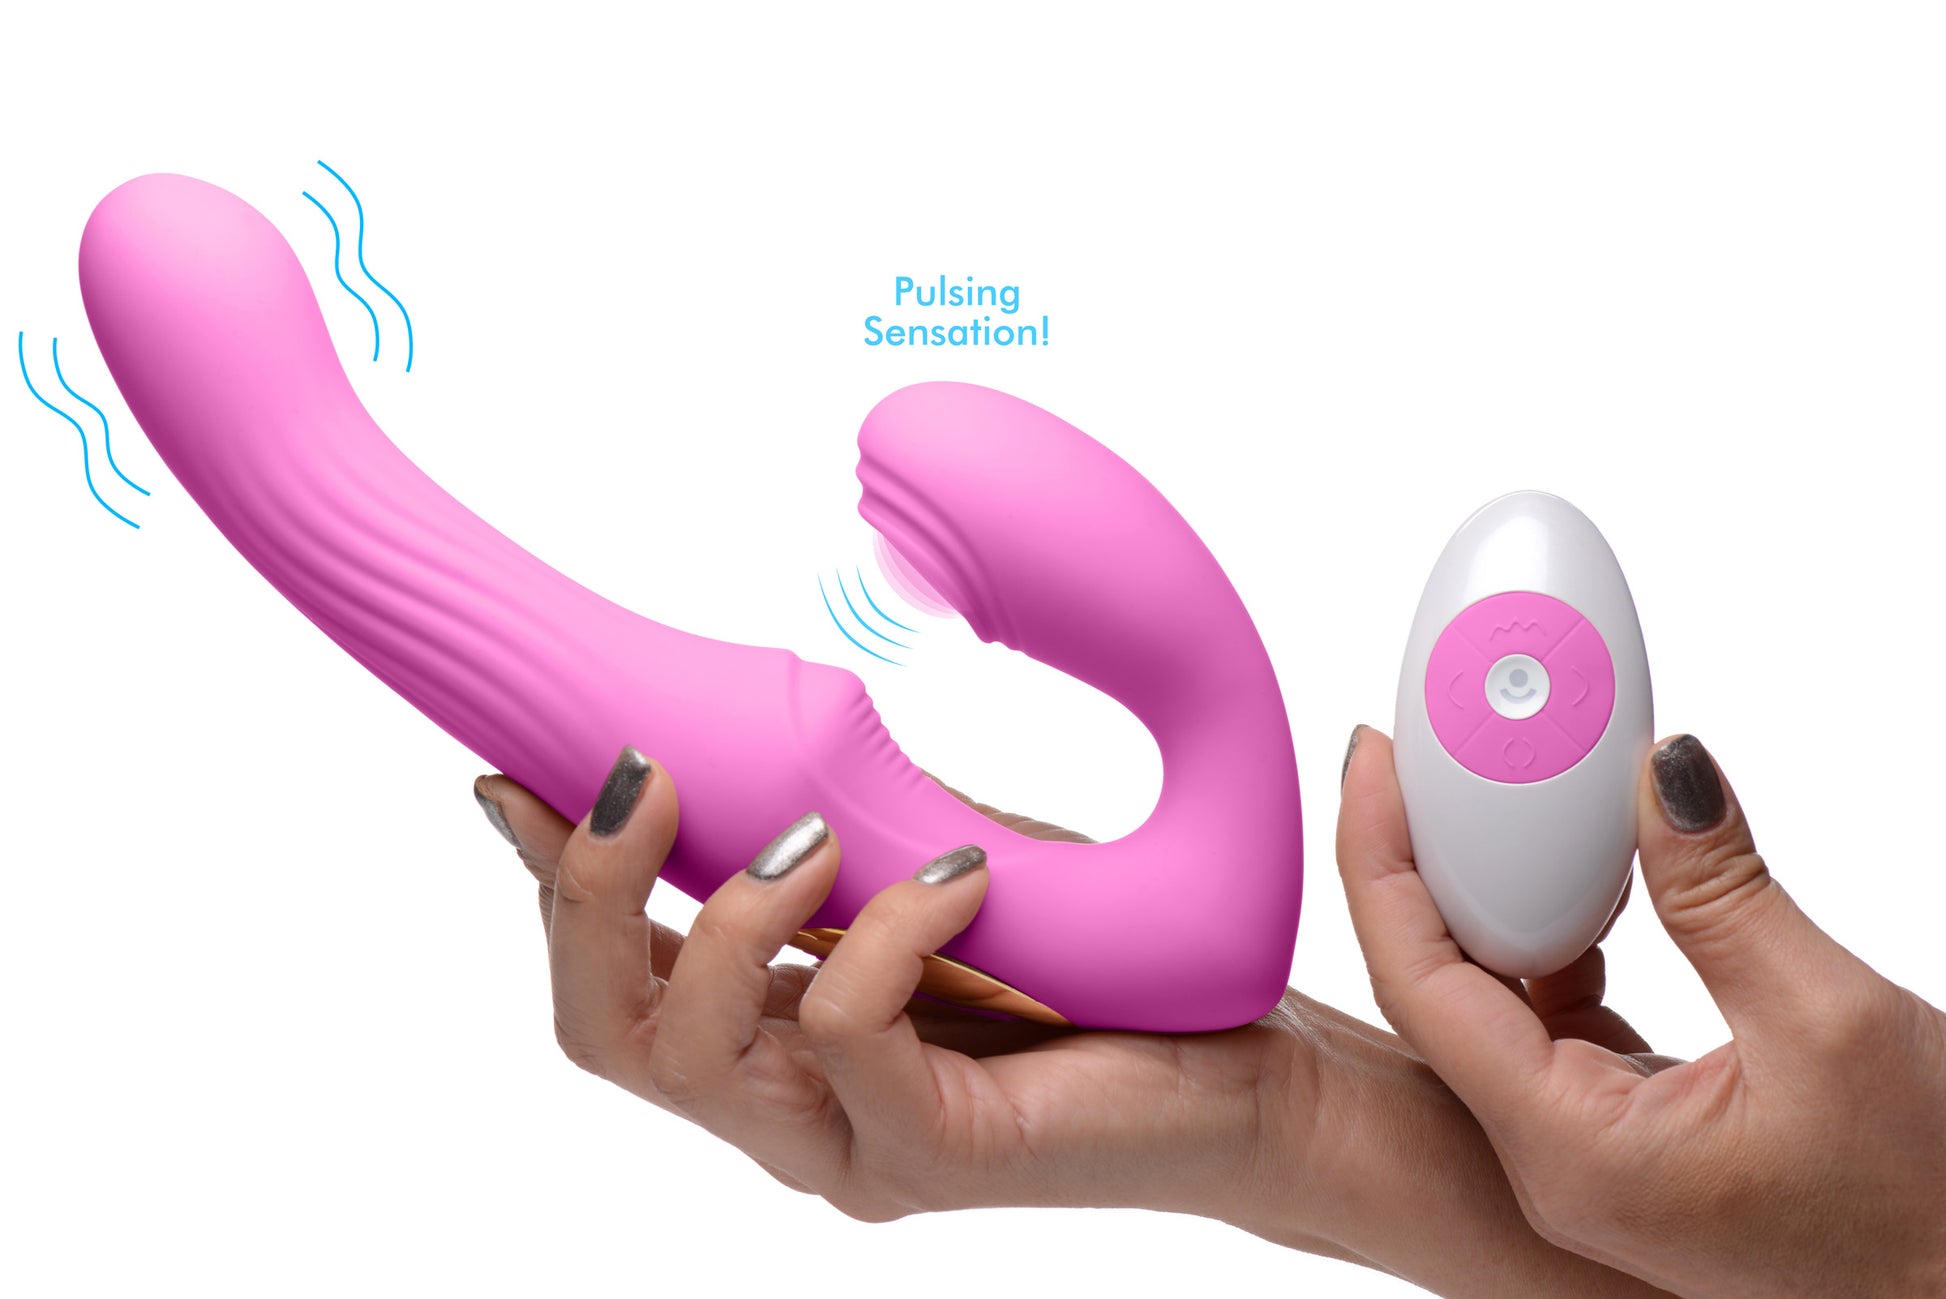 15X U-Pulse Silicone Pulsating and Vibrating Strapless Strap-on with Remote - Pink - UABDSM